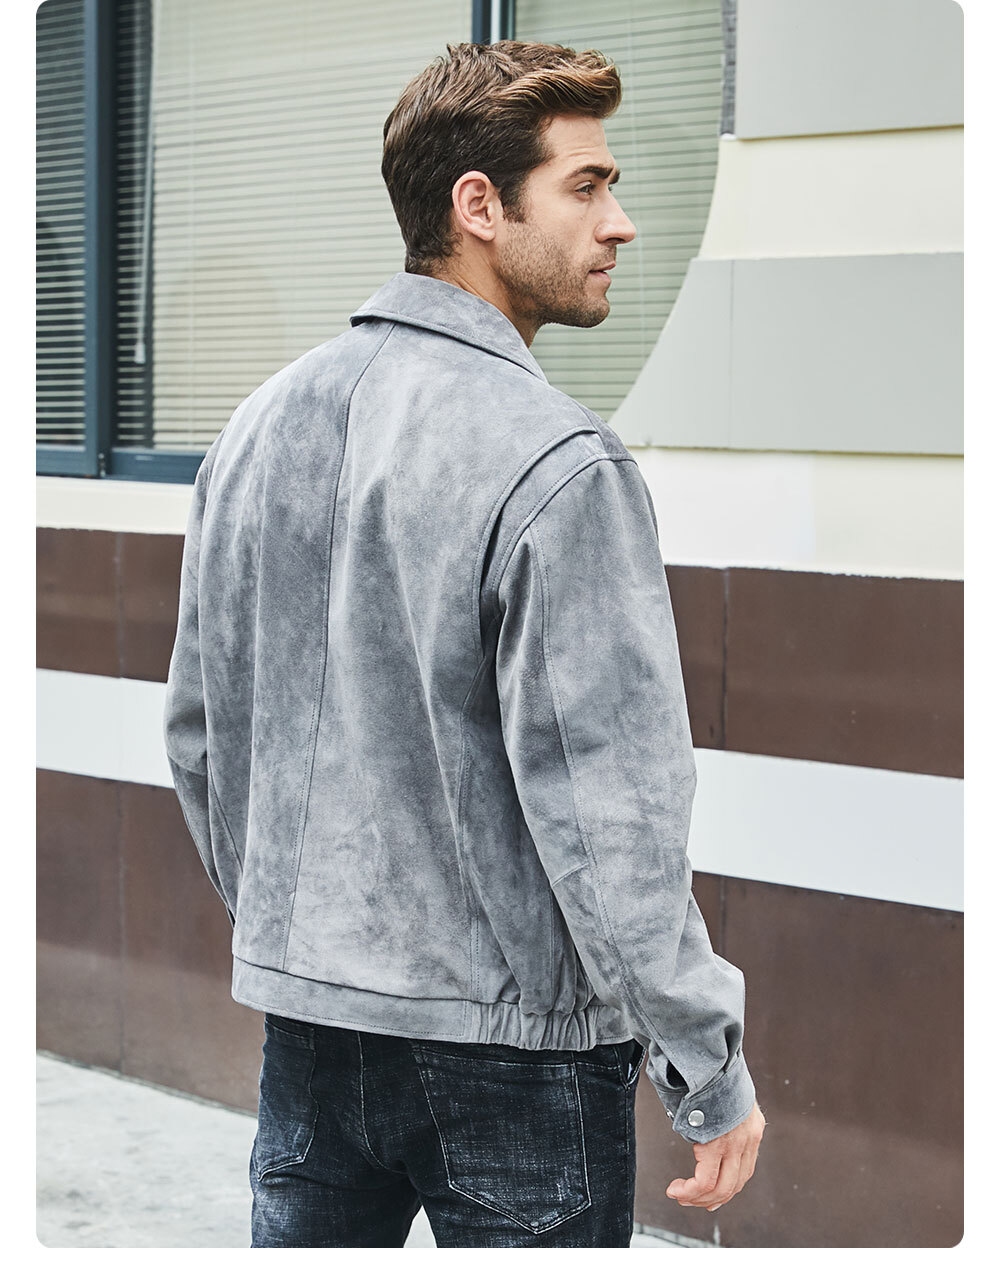 Men's Gray Suede Leather Jacket Bomber MXGX294 Buy flavor leather moto jacket| buy pigskin leather jacket